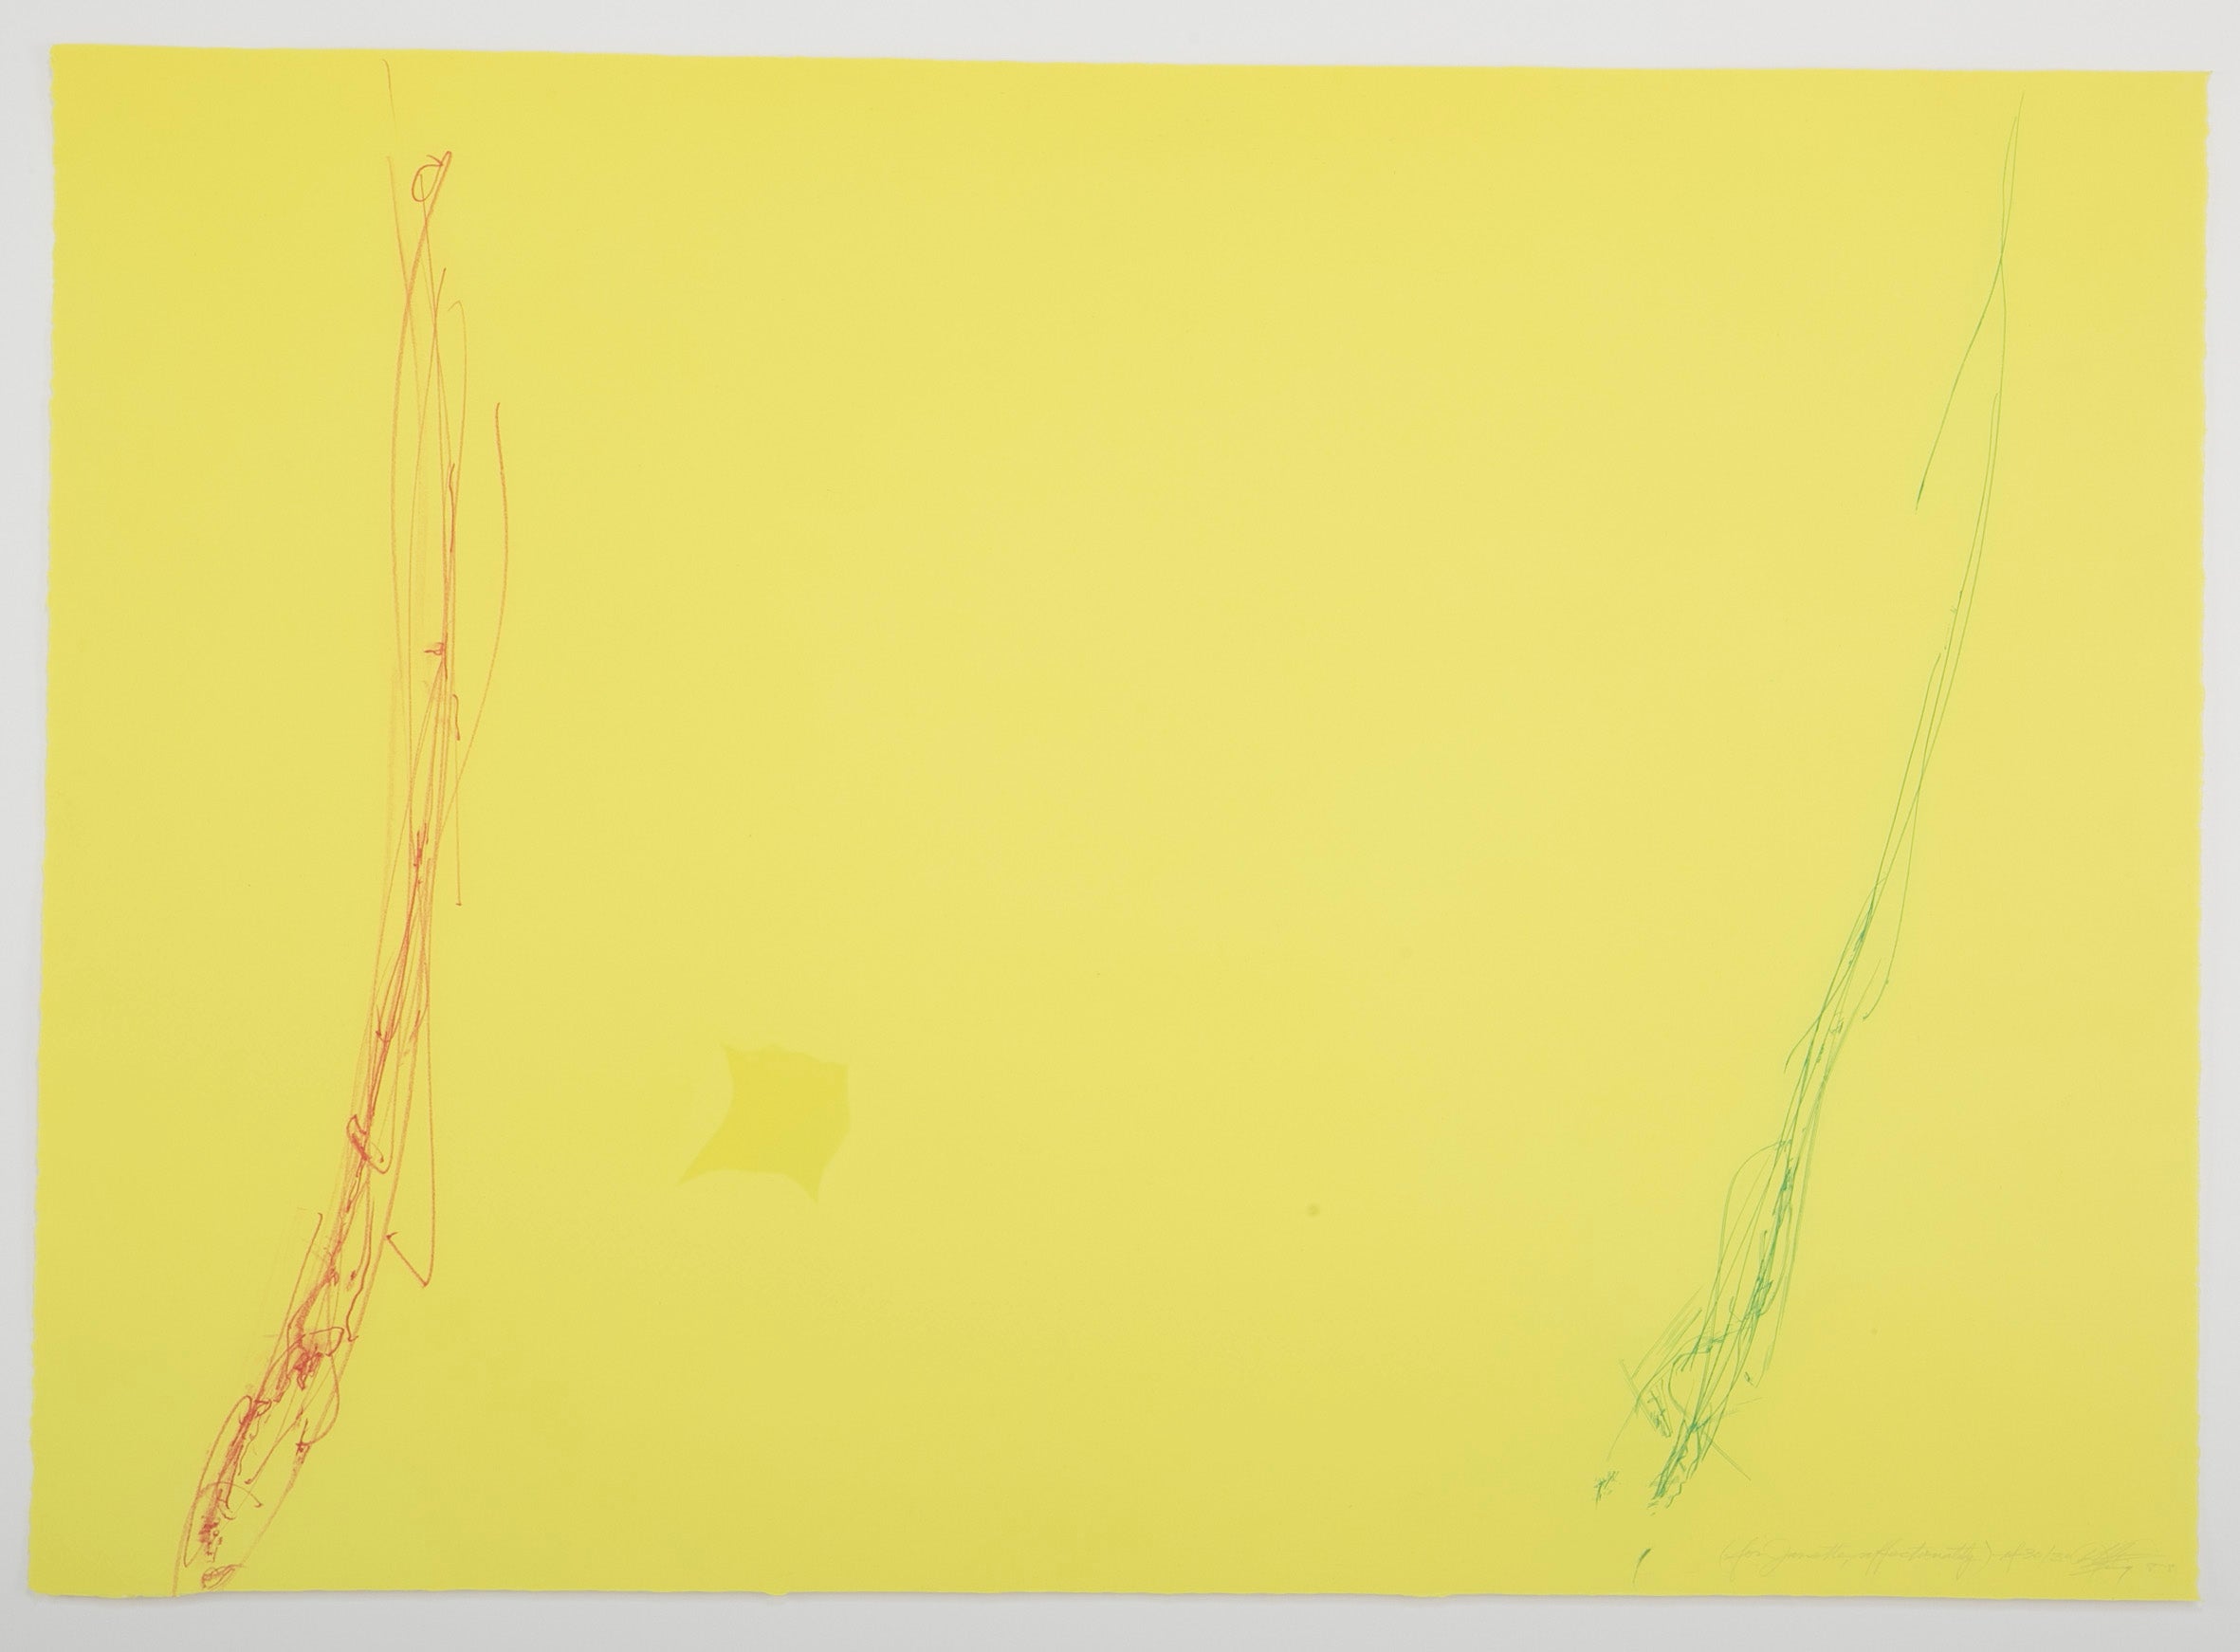 Dan Flavin "for Janette, affectionately" Aquatint in Colors